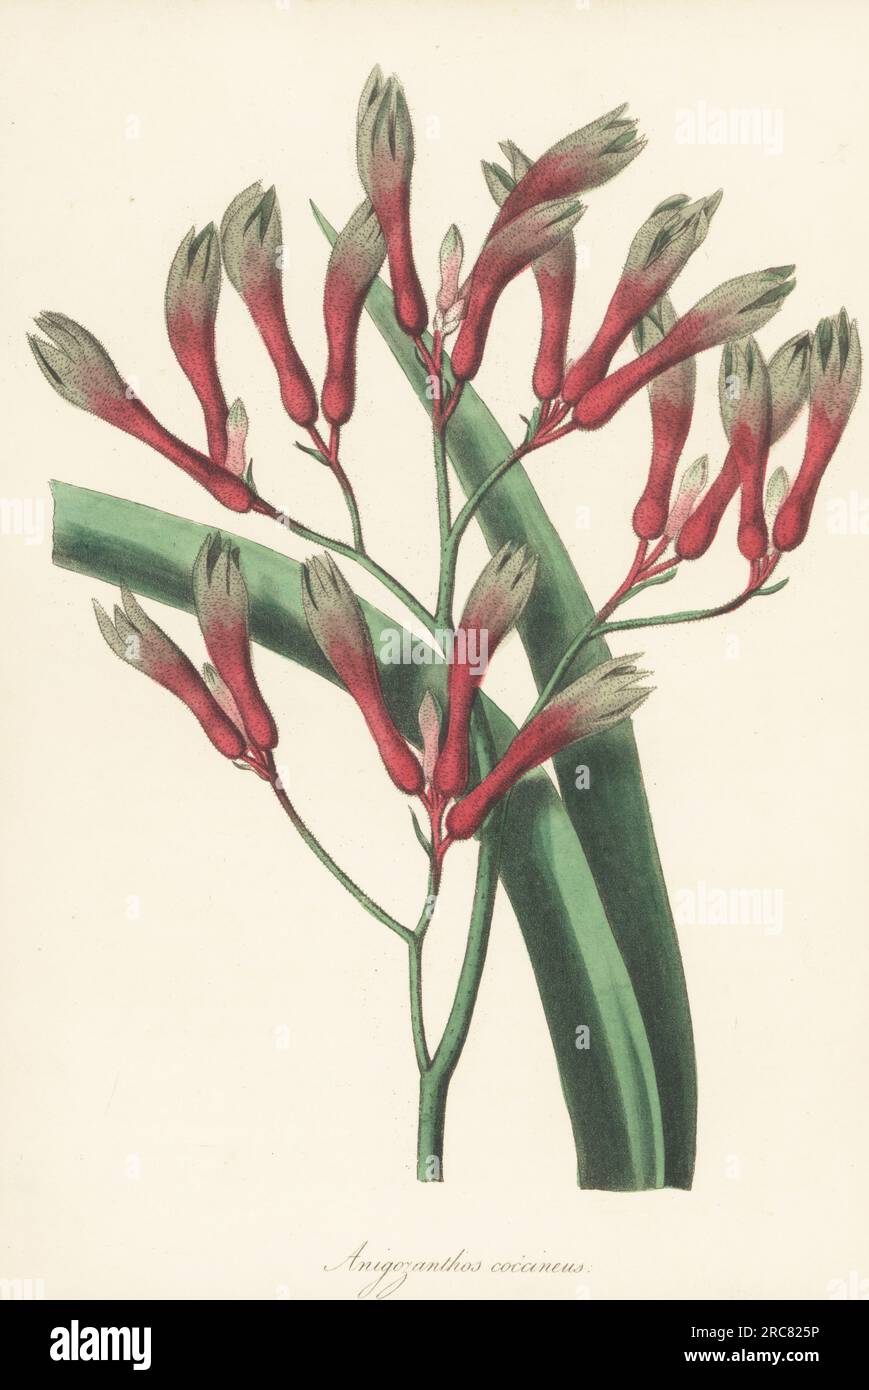 Tall, yellow or evergreen kangaroo paw, Anigozanthos flavidus. Native to Swan River colony, Australia, and introduced via R. Mangles of Sunning Hill. Scarlet anigozanthos, Anigozanthos coccineus. Handcoloured lithograph from Joseph Paxton’s Magazine of Botany, and Register of Flowering Plants, Volume 5, Orr and Smith, London, 1838. Stock Photo